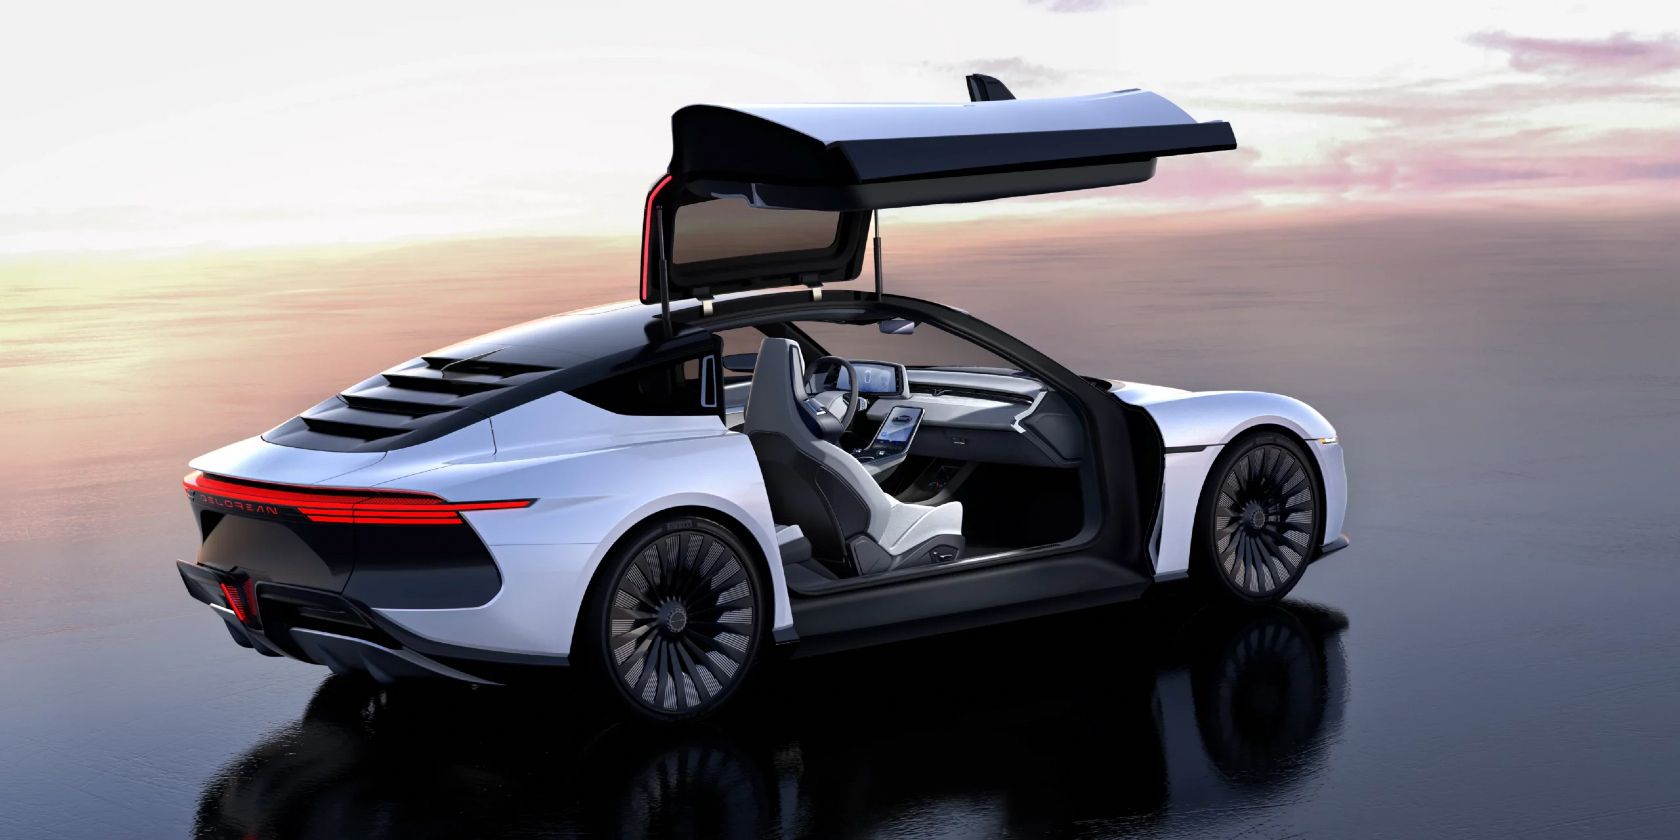 delorean alpha5 launch edition silver with gull wing door open on passenger side showing interior